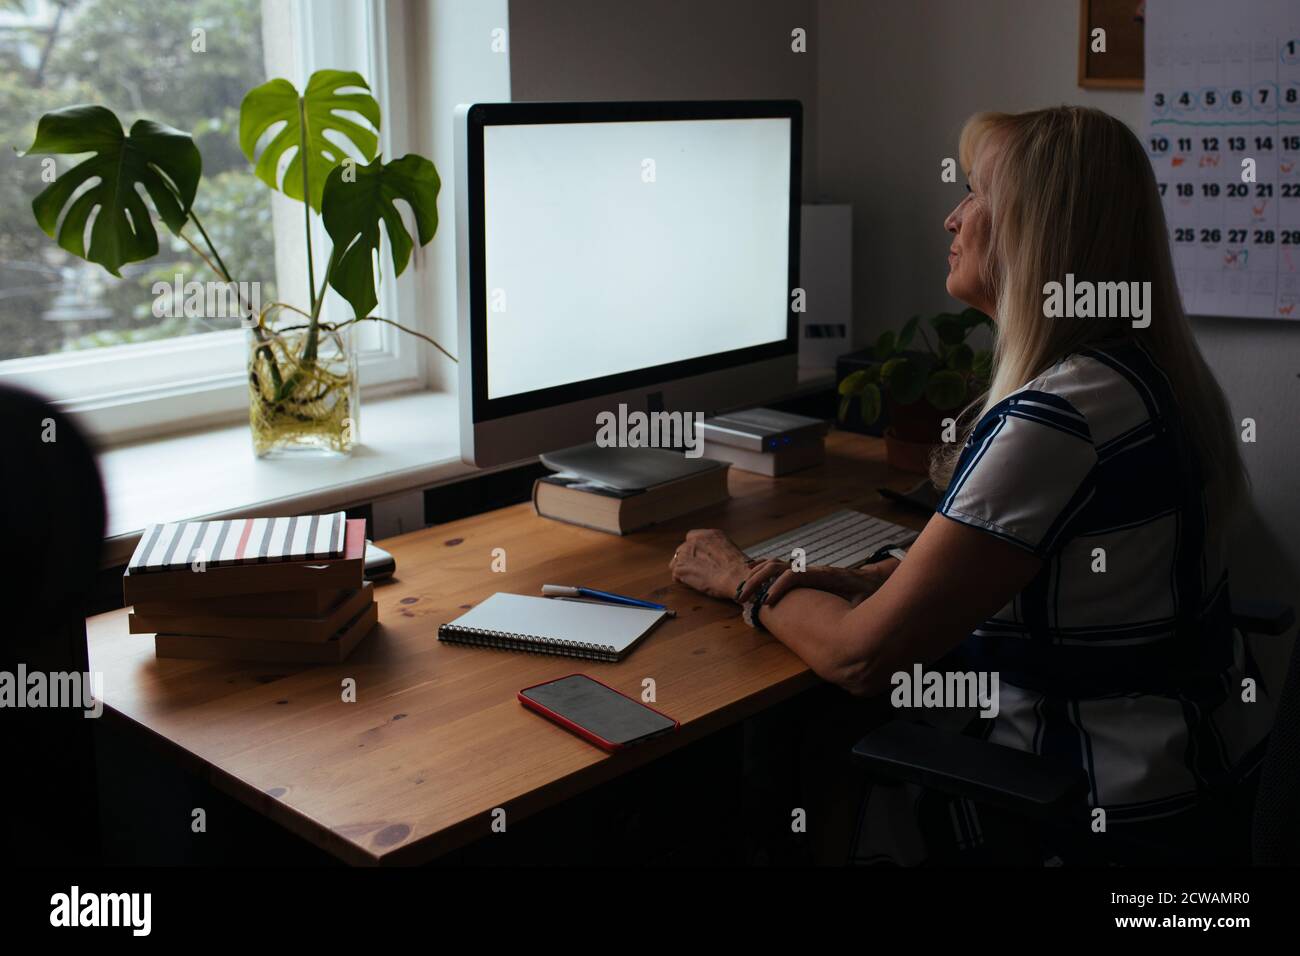 Online training teacher. Day to day new normal office Work from home. Smiling mature woman having video call via laptop in the studio flat office. Stock Photo